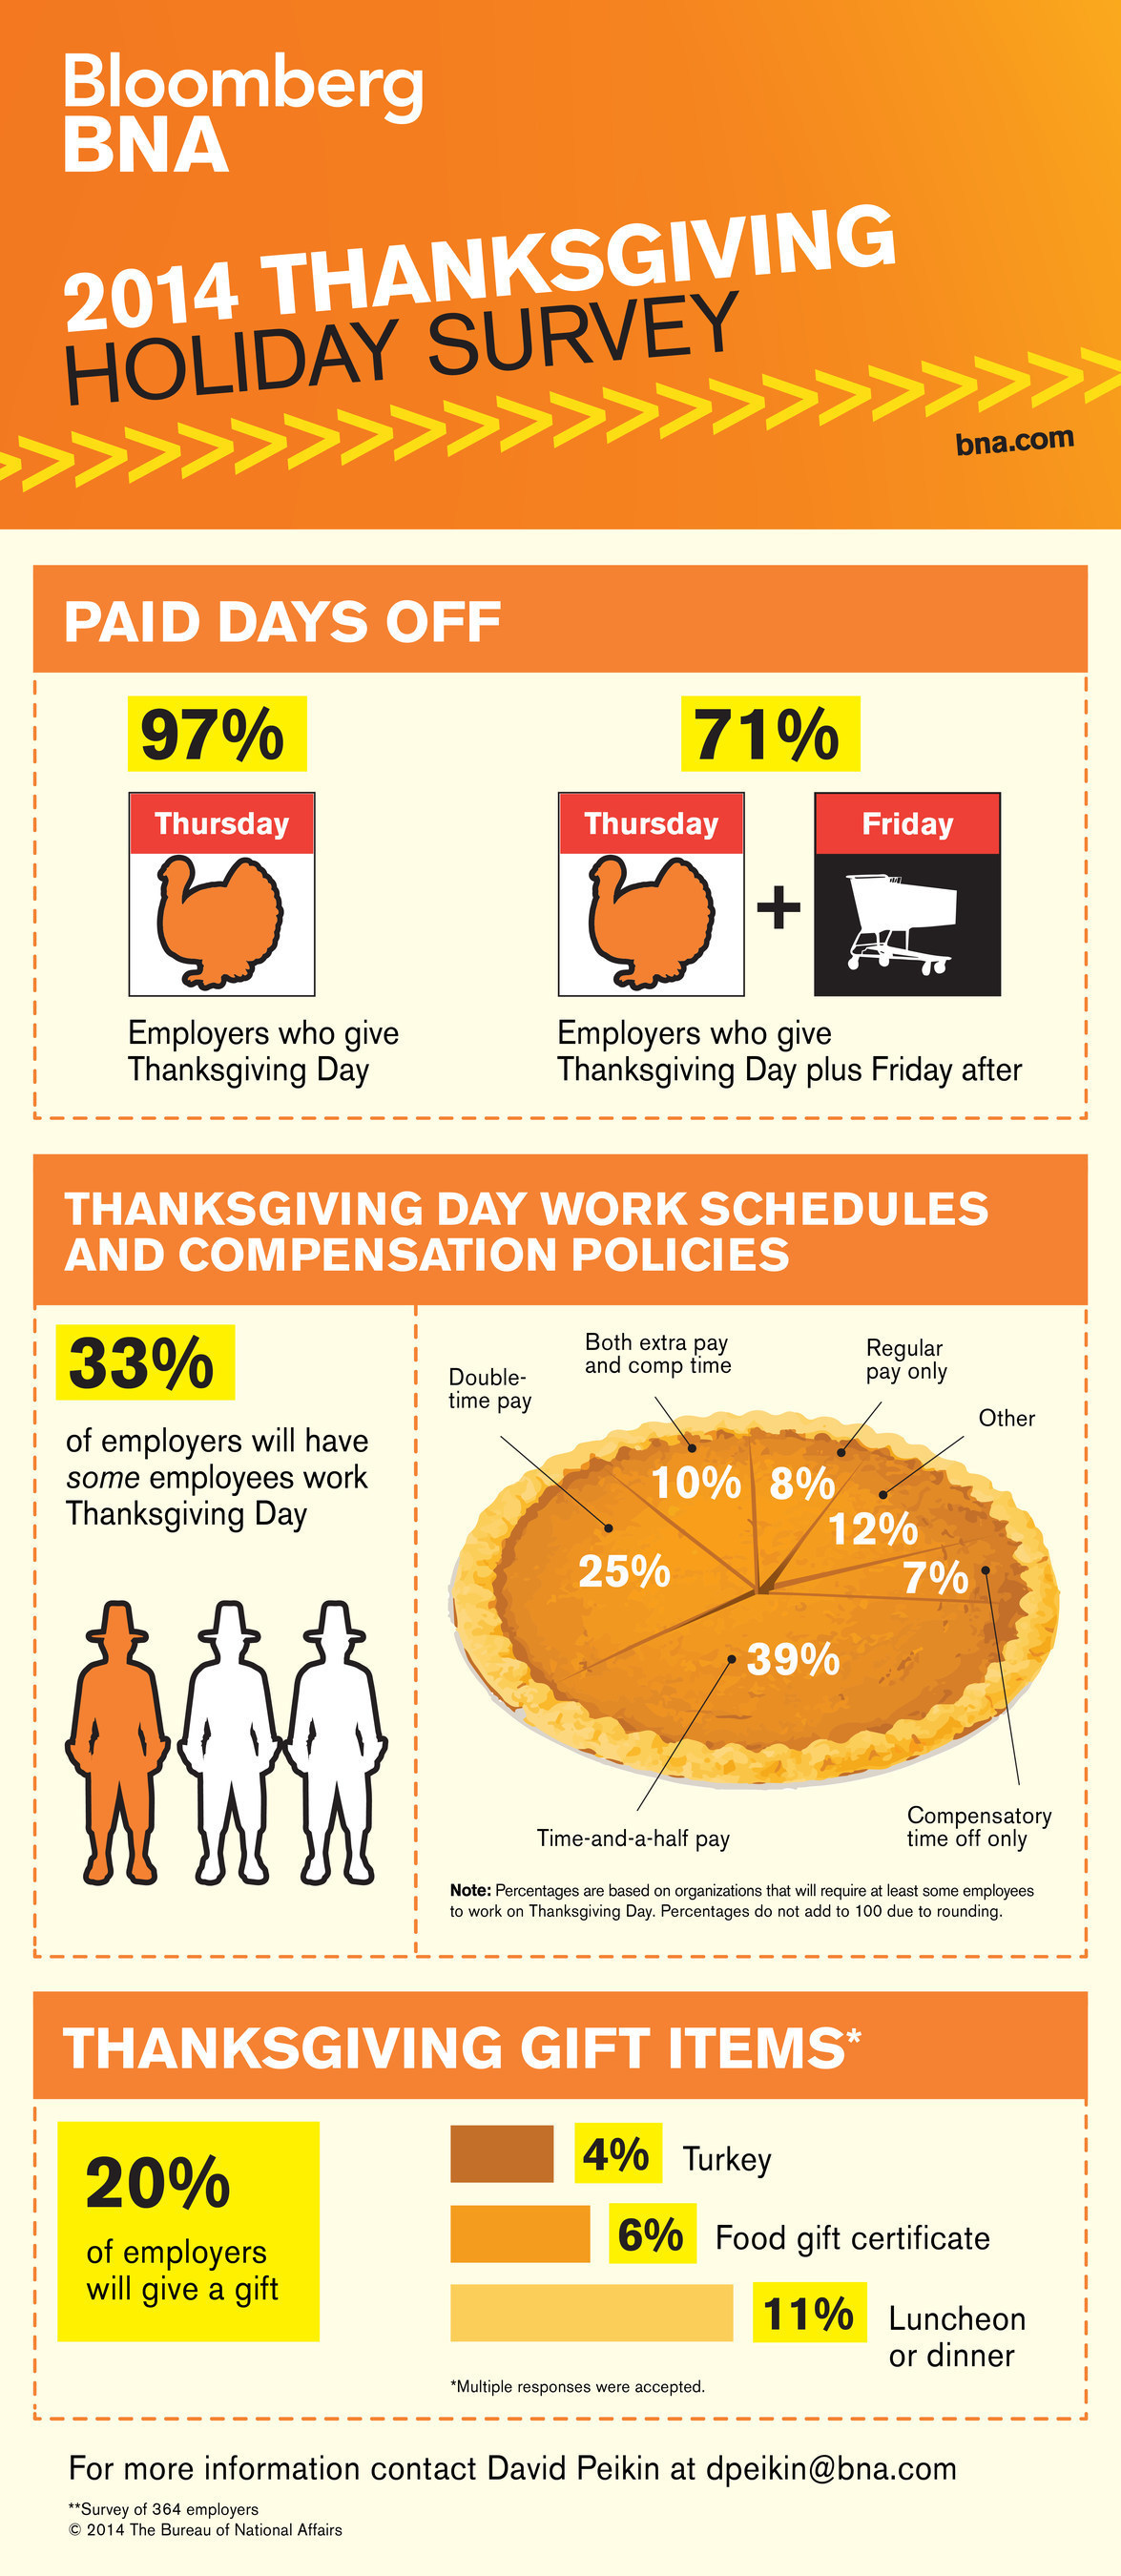 Findings from Bloomberg BNA's 2014 Thanksgiving Holiday Practices Survey reveal 33% of employers will require some employees work on Thanksgiving.